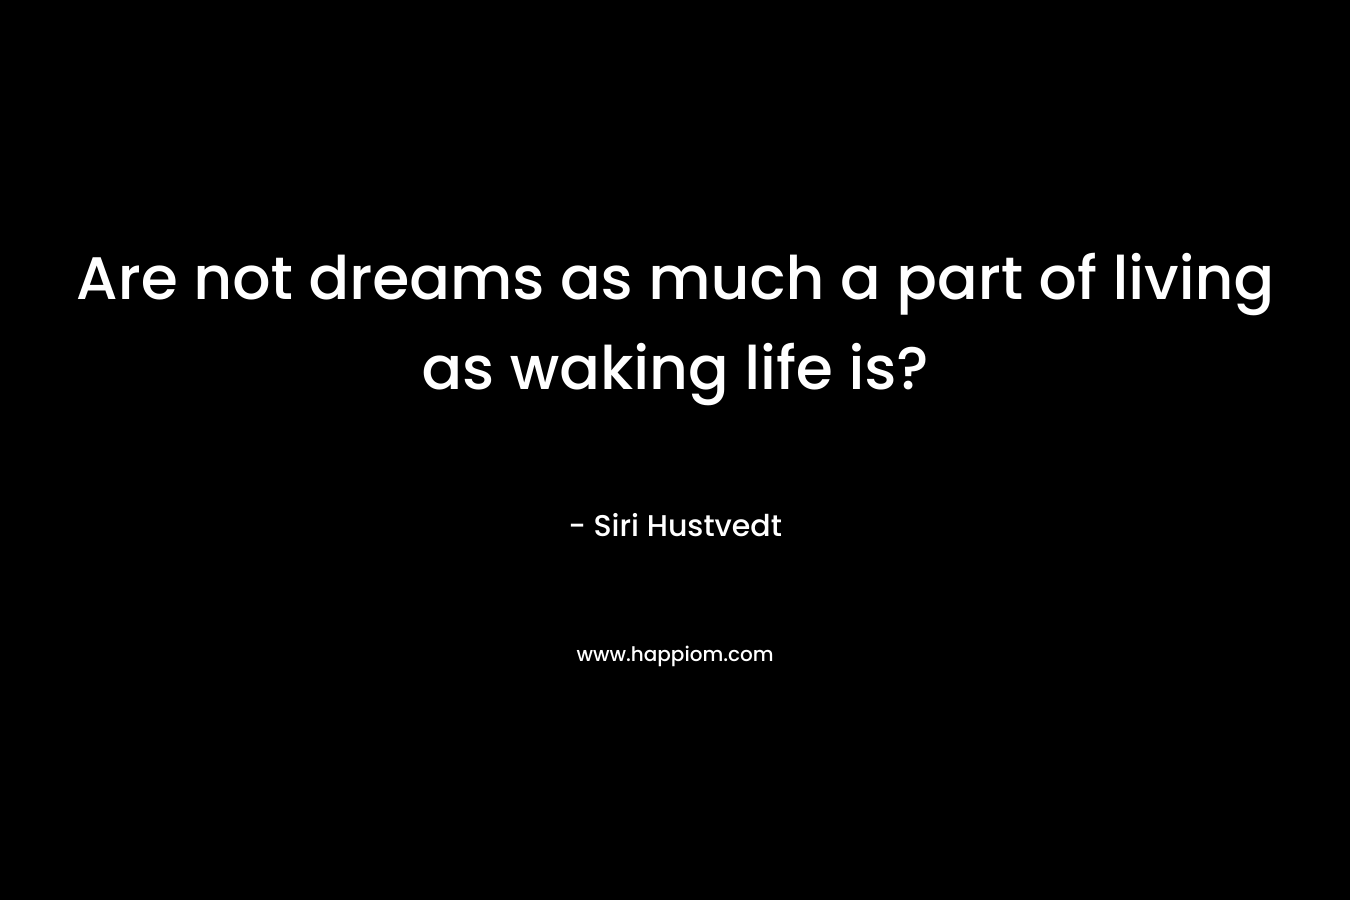 Are not dreams as much a part of living as waking life is?